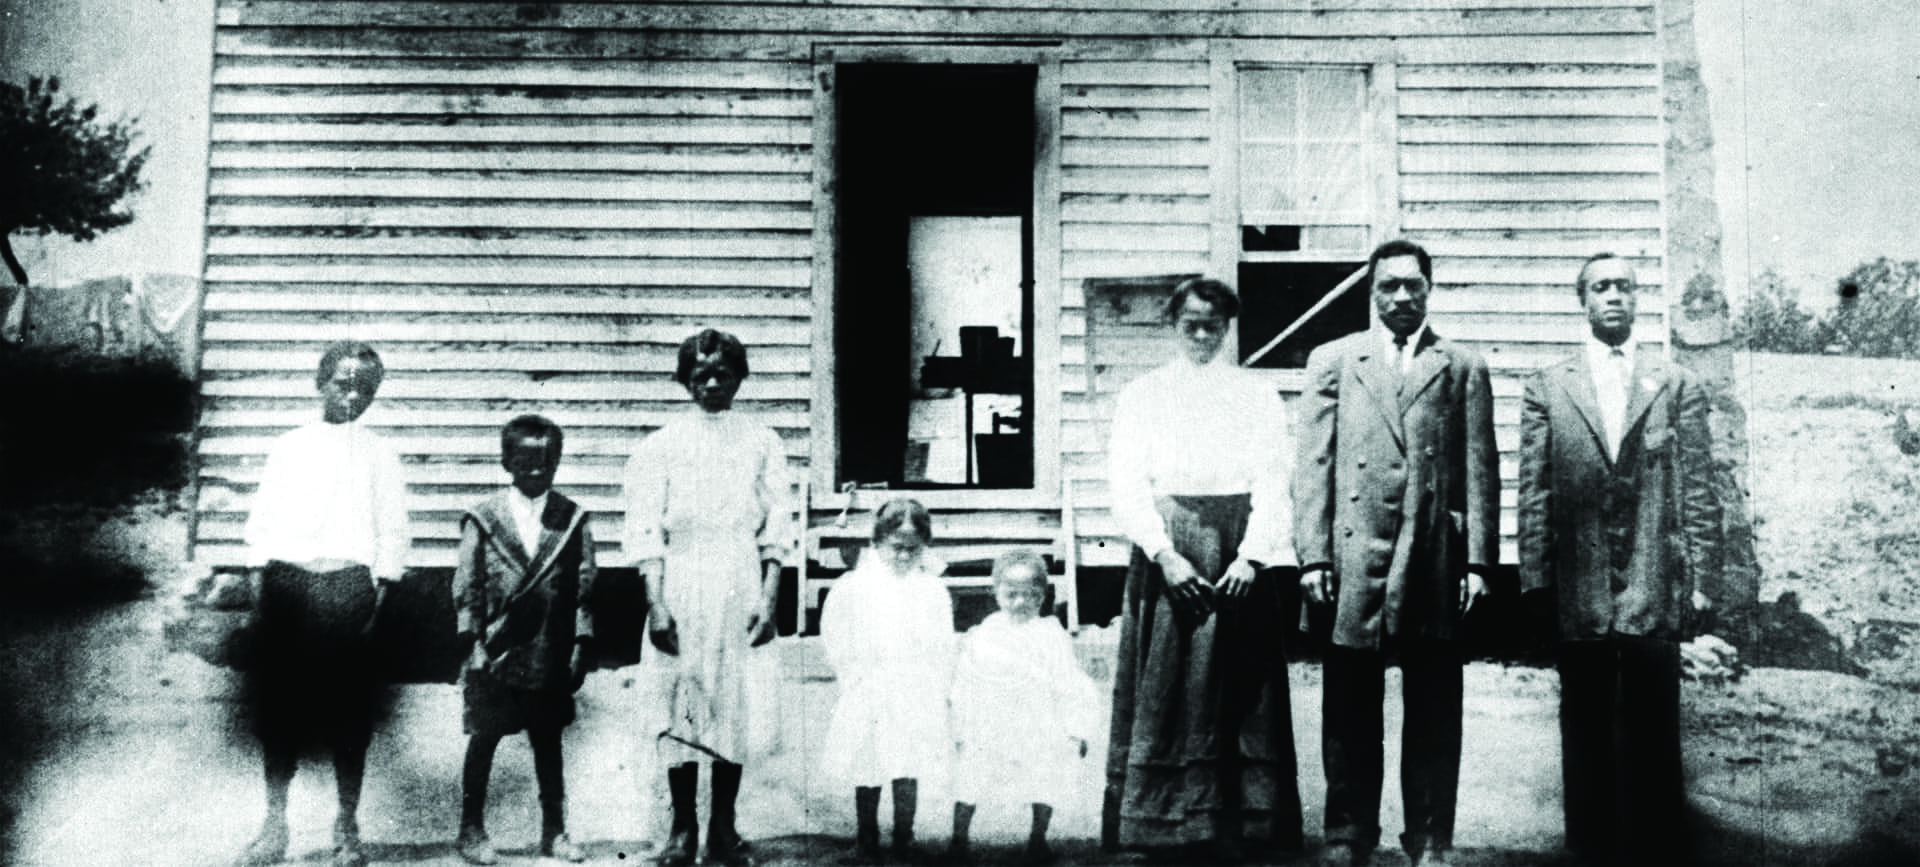 Keith family, Black sharecroppers in Wake County, 1911. Courtesy State Archives of North Carolina.